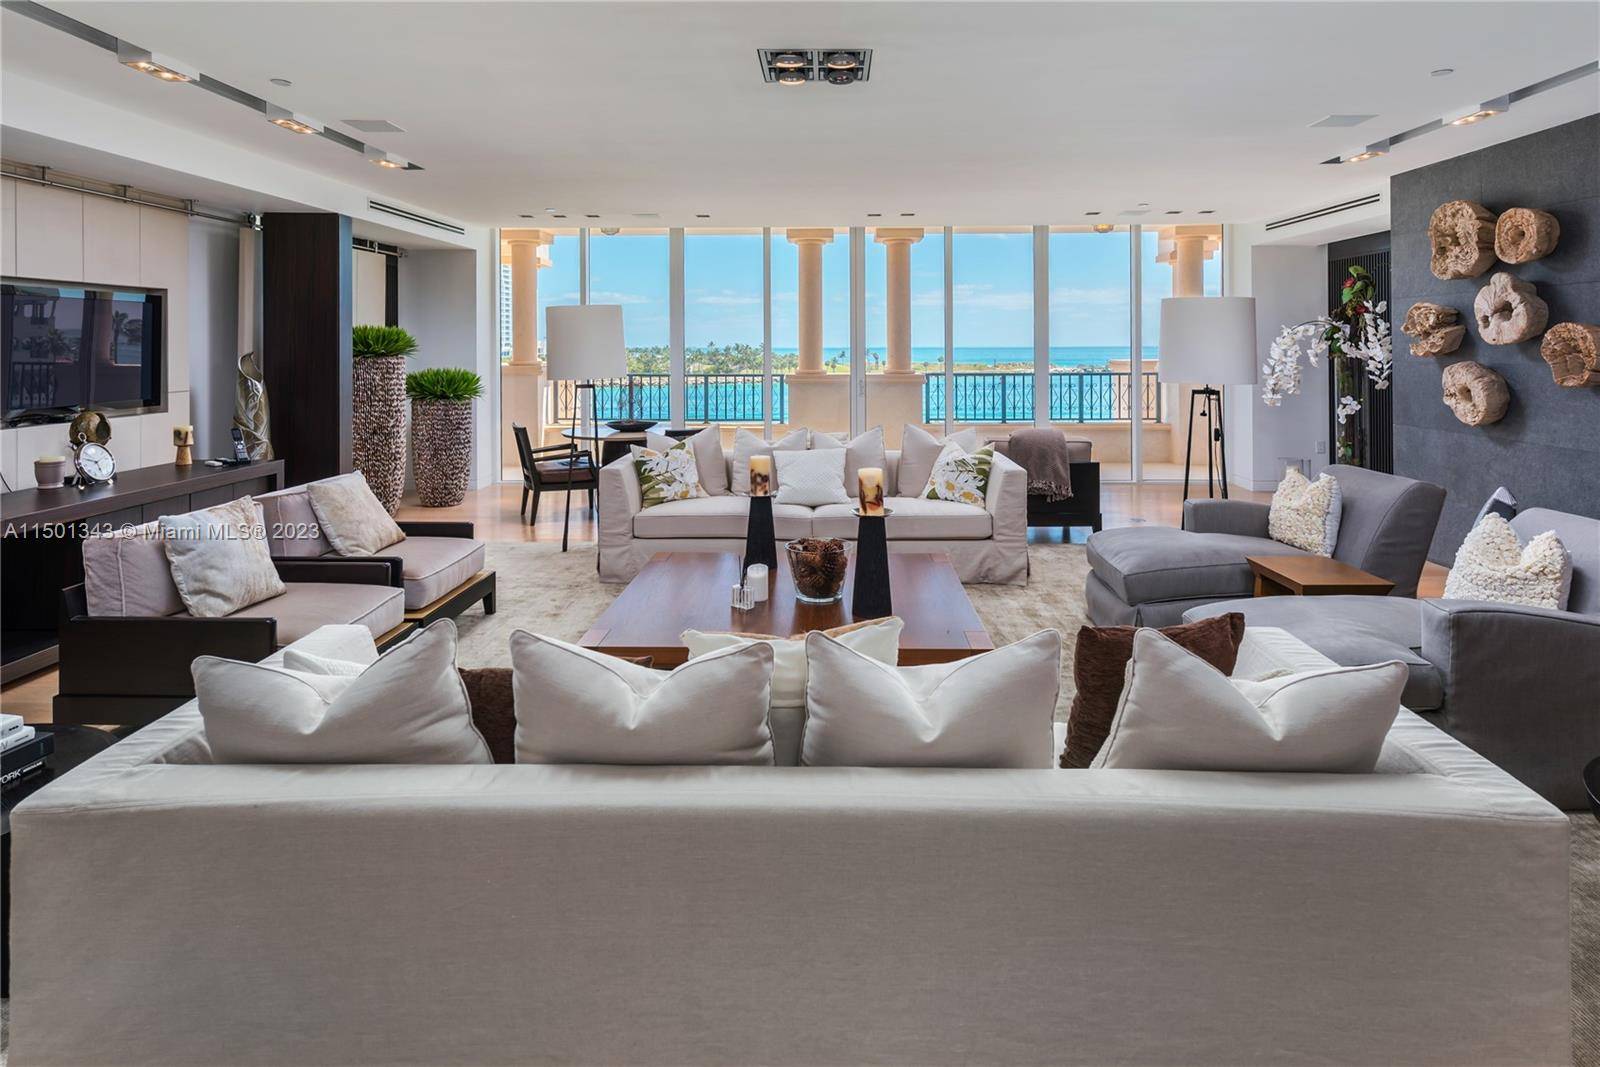 Impeccably Designed Palazzo Del Mare residence with high end European furnishings.